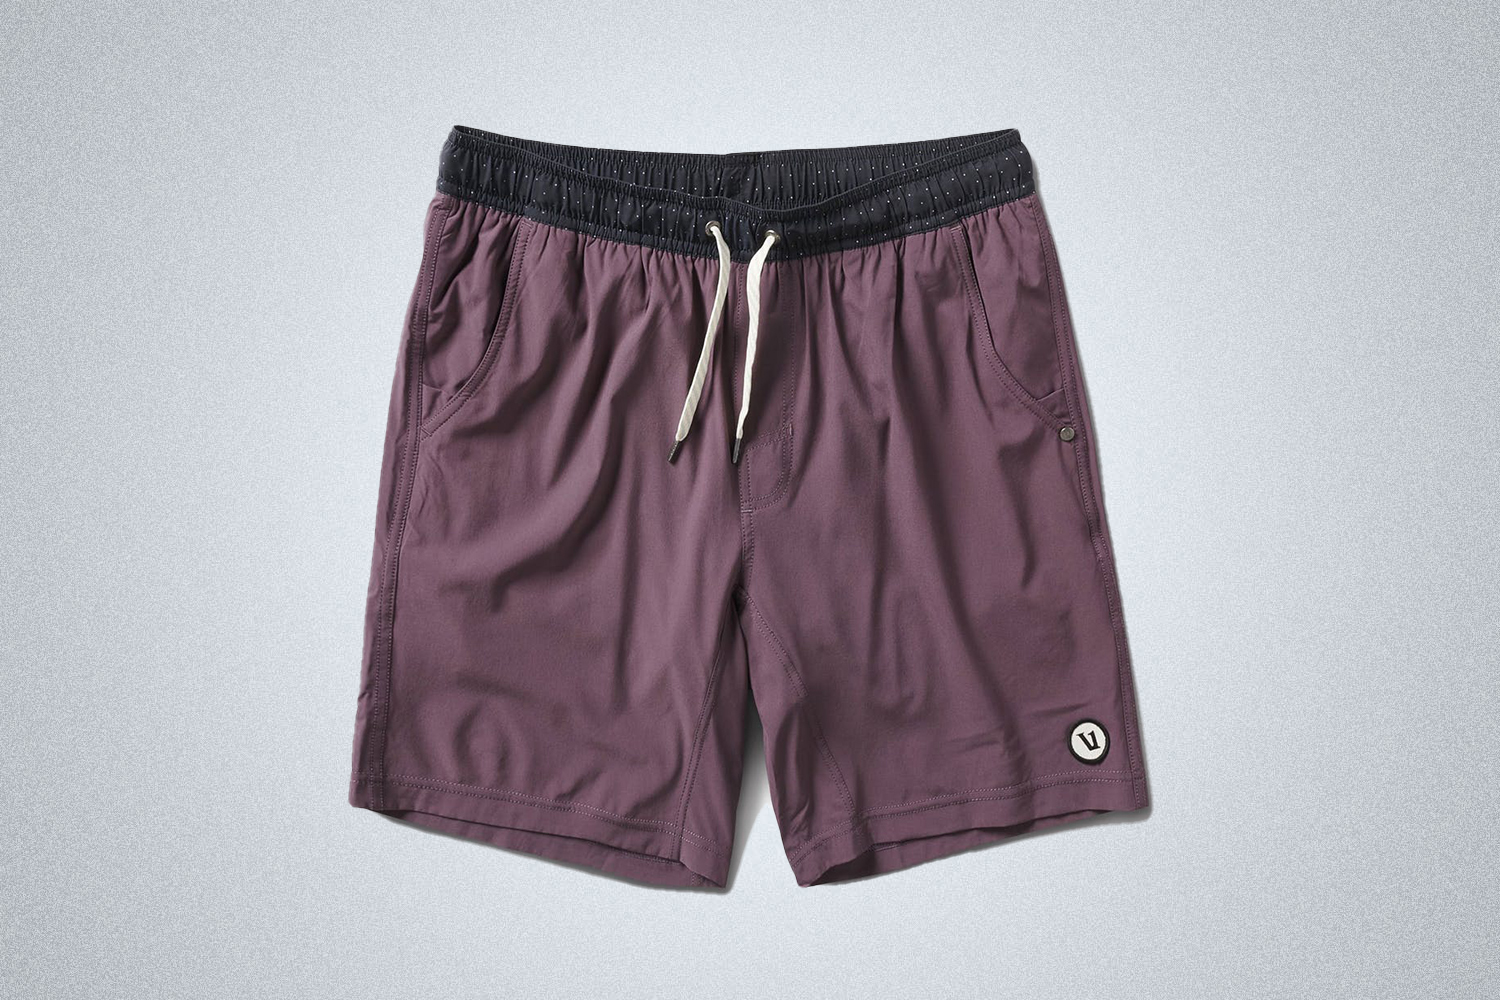 a pair of maroon athletic shorts